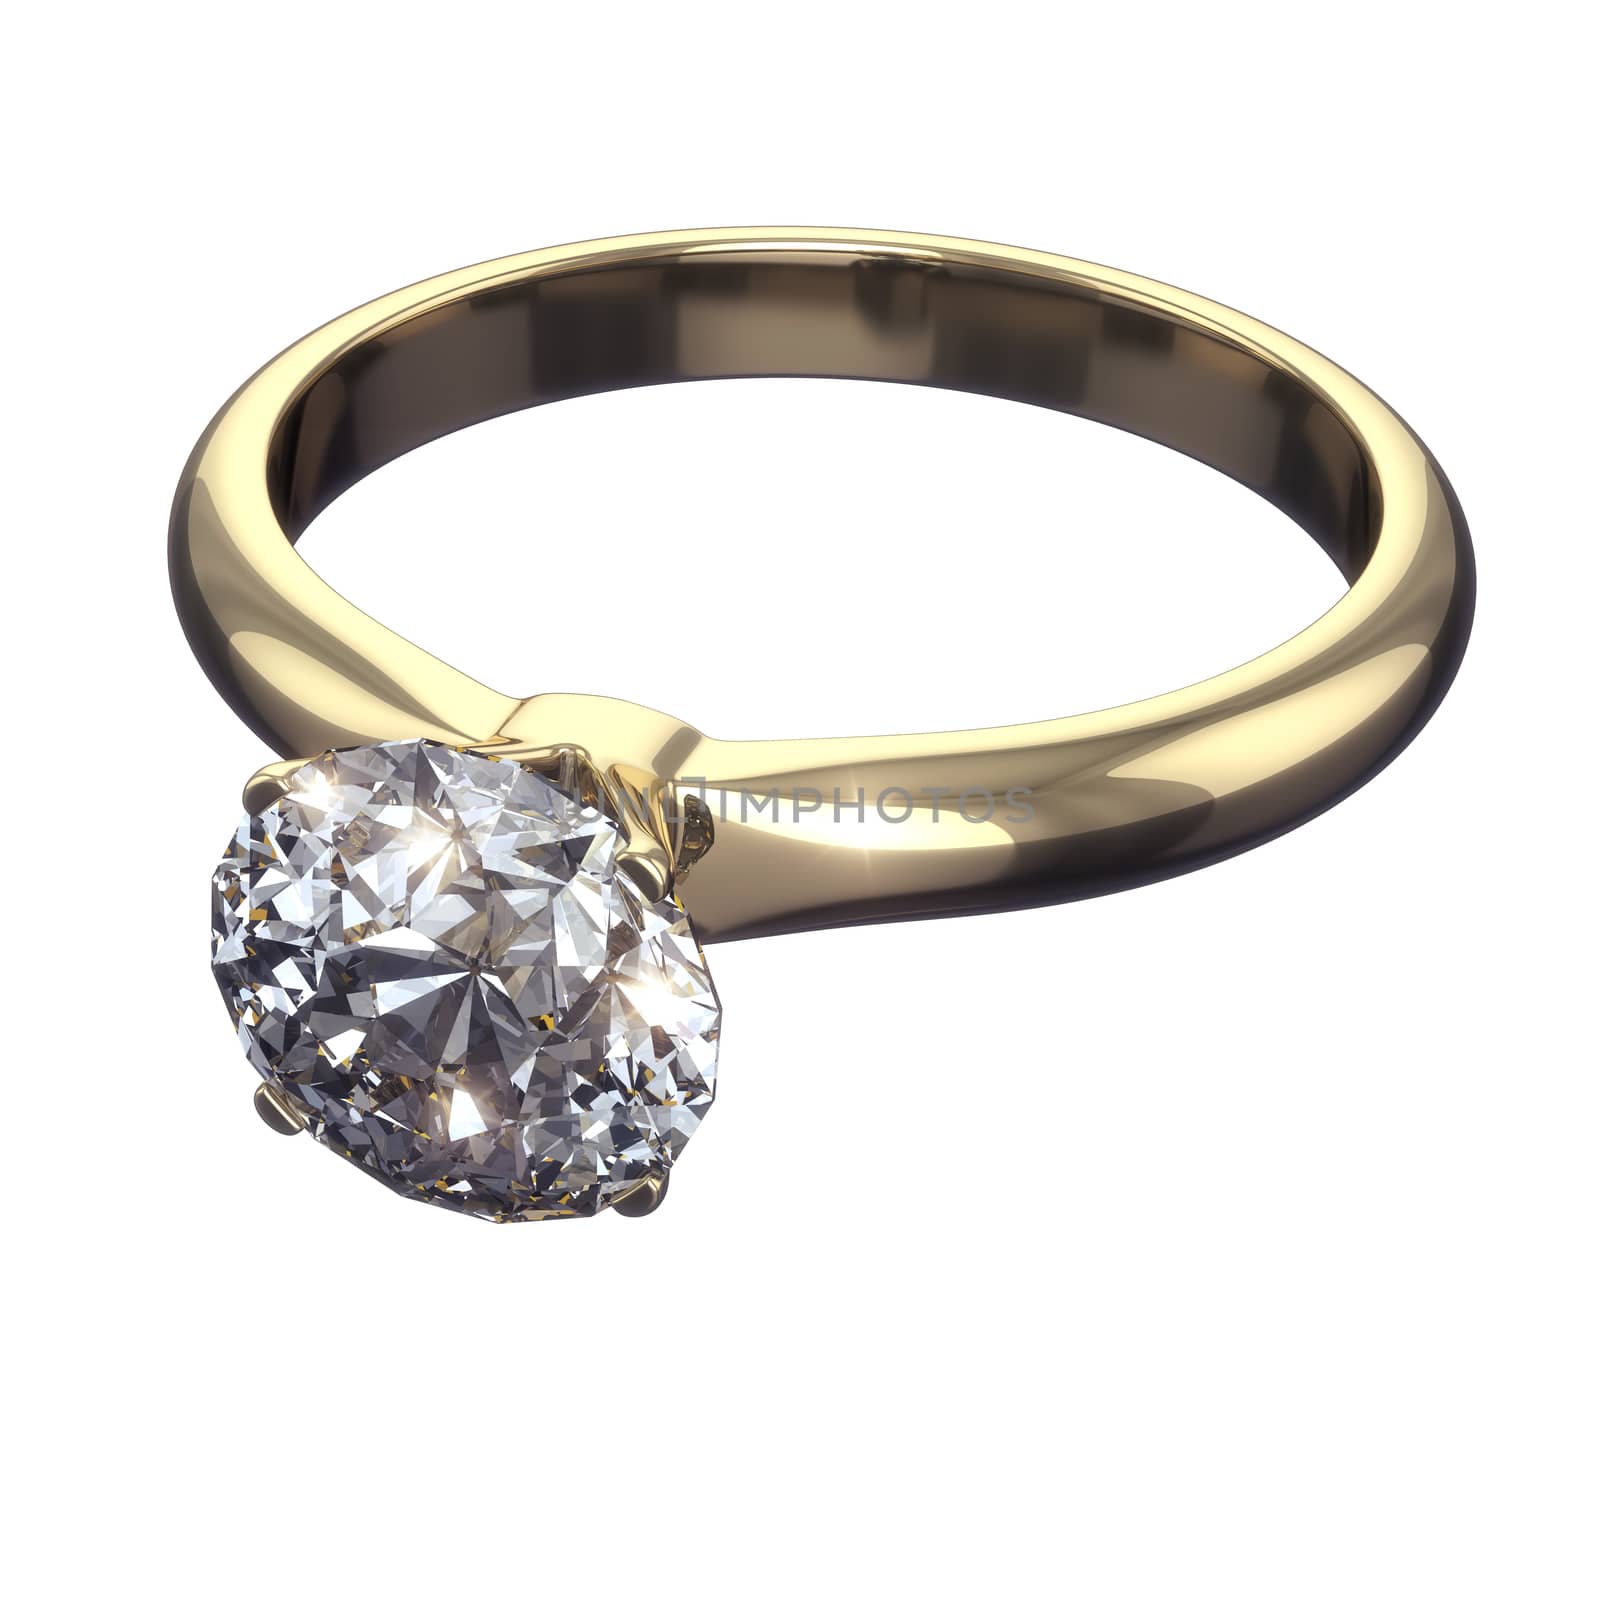 Diamond golden ring - isolated on white background with clipping path
